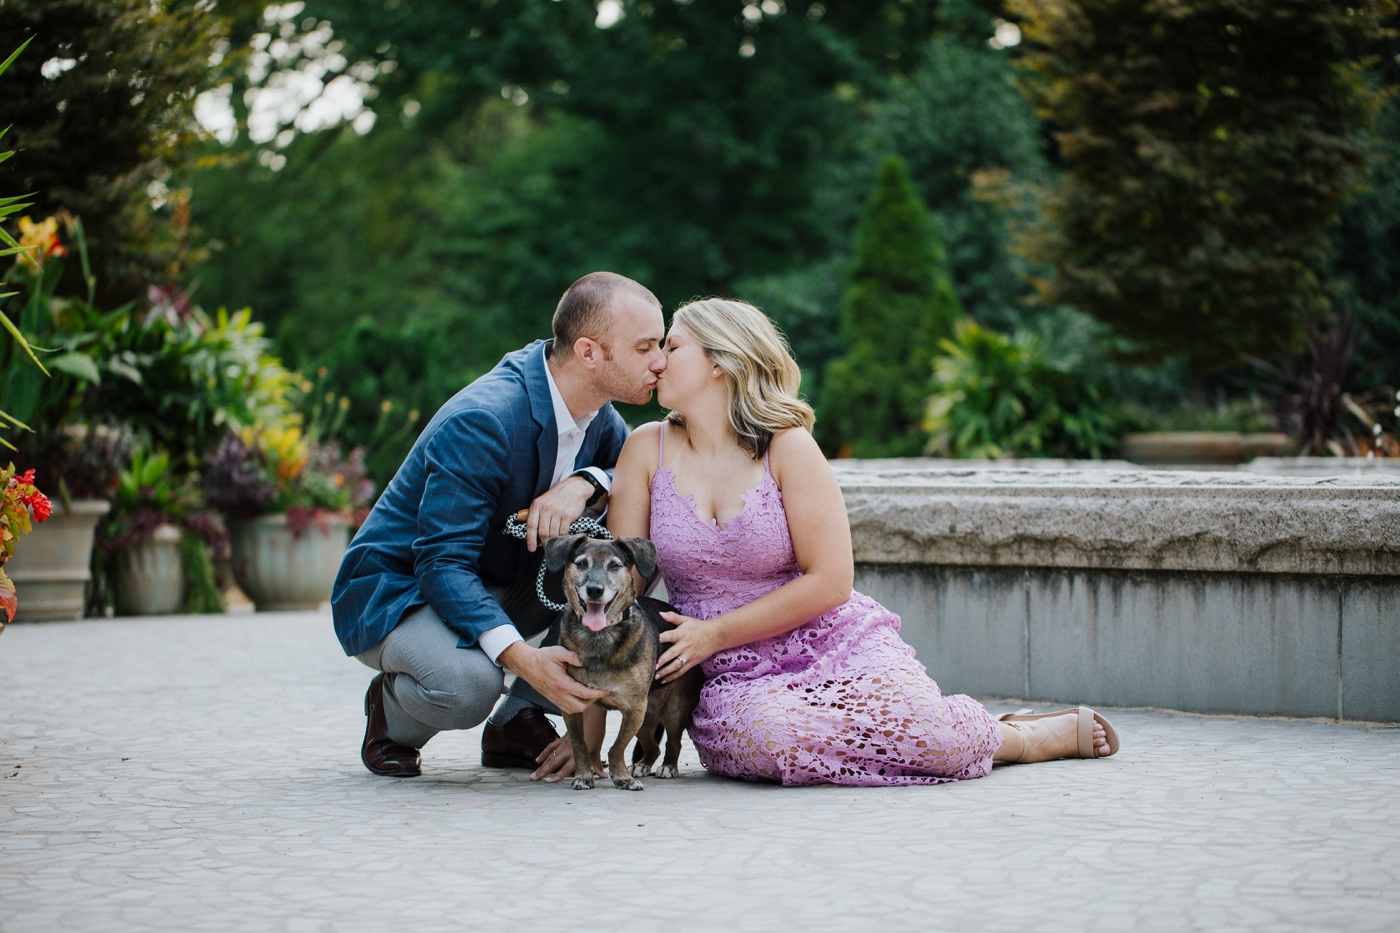 Engagement session with their Lorgi pup, Brownie